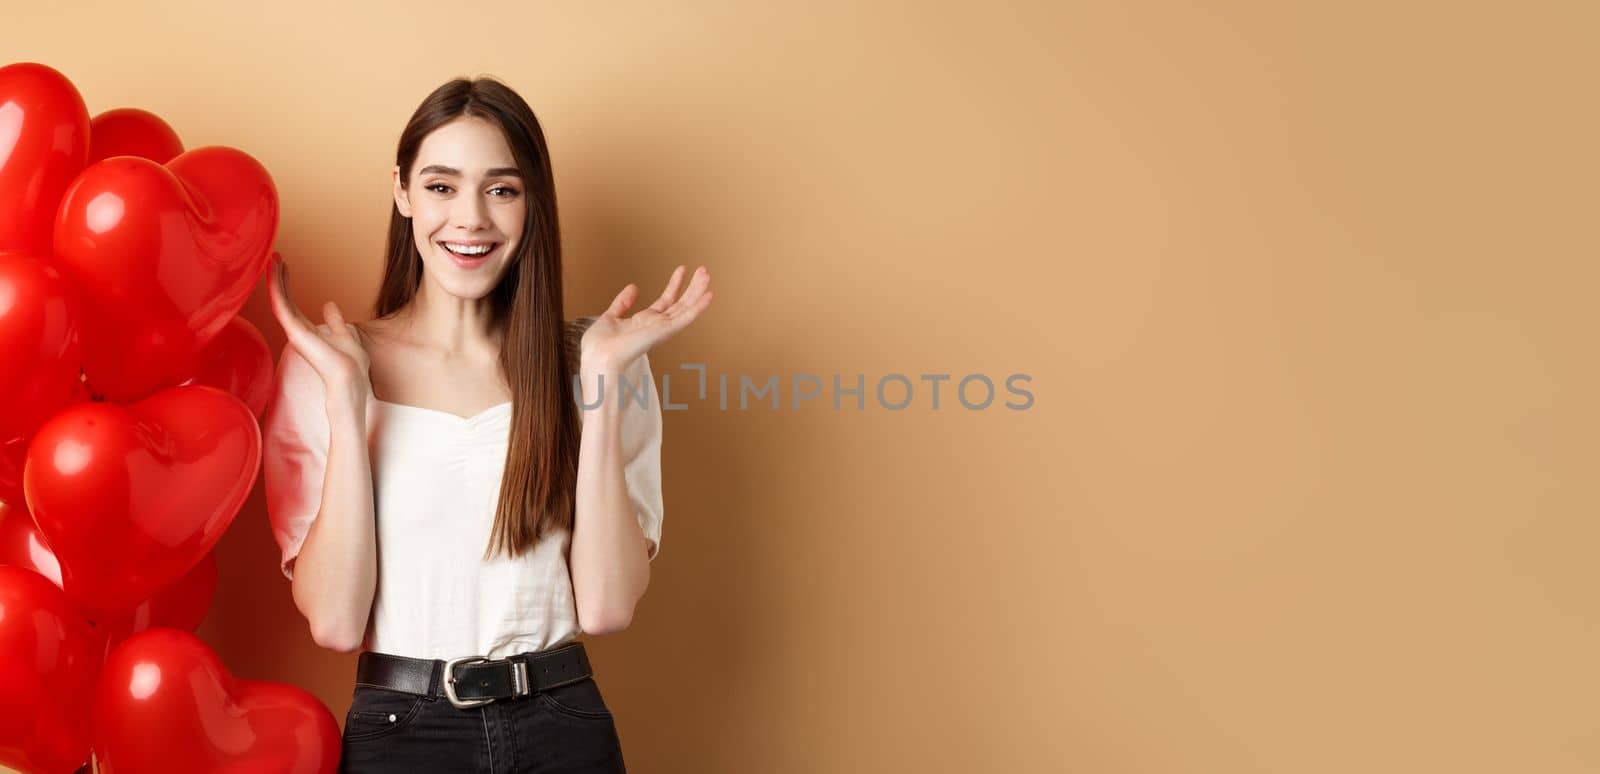 Valentines day and love concept. Happy smiling woman raising hands up surprised, standing near romantic heart balloons on beige background by Benzoix